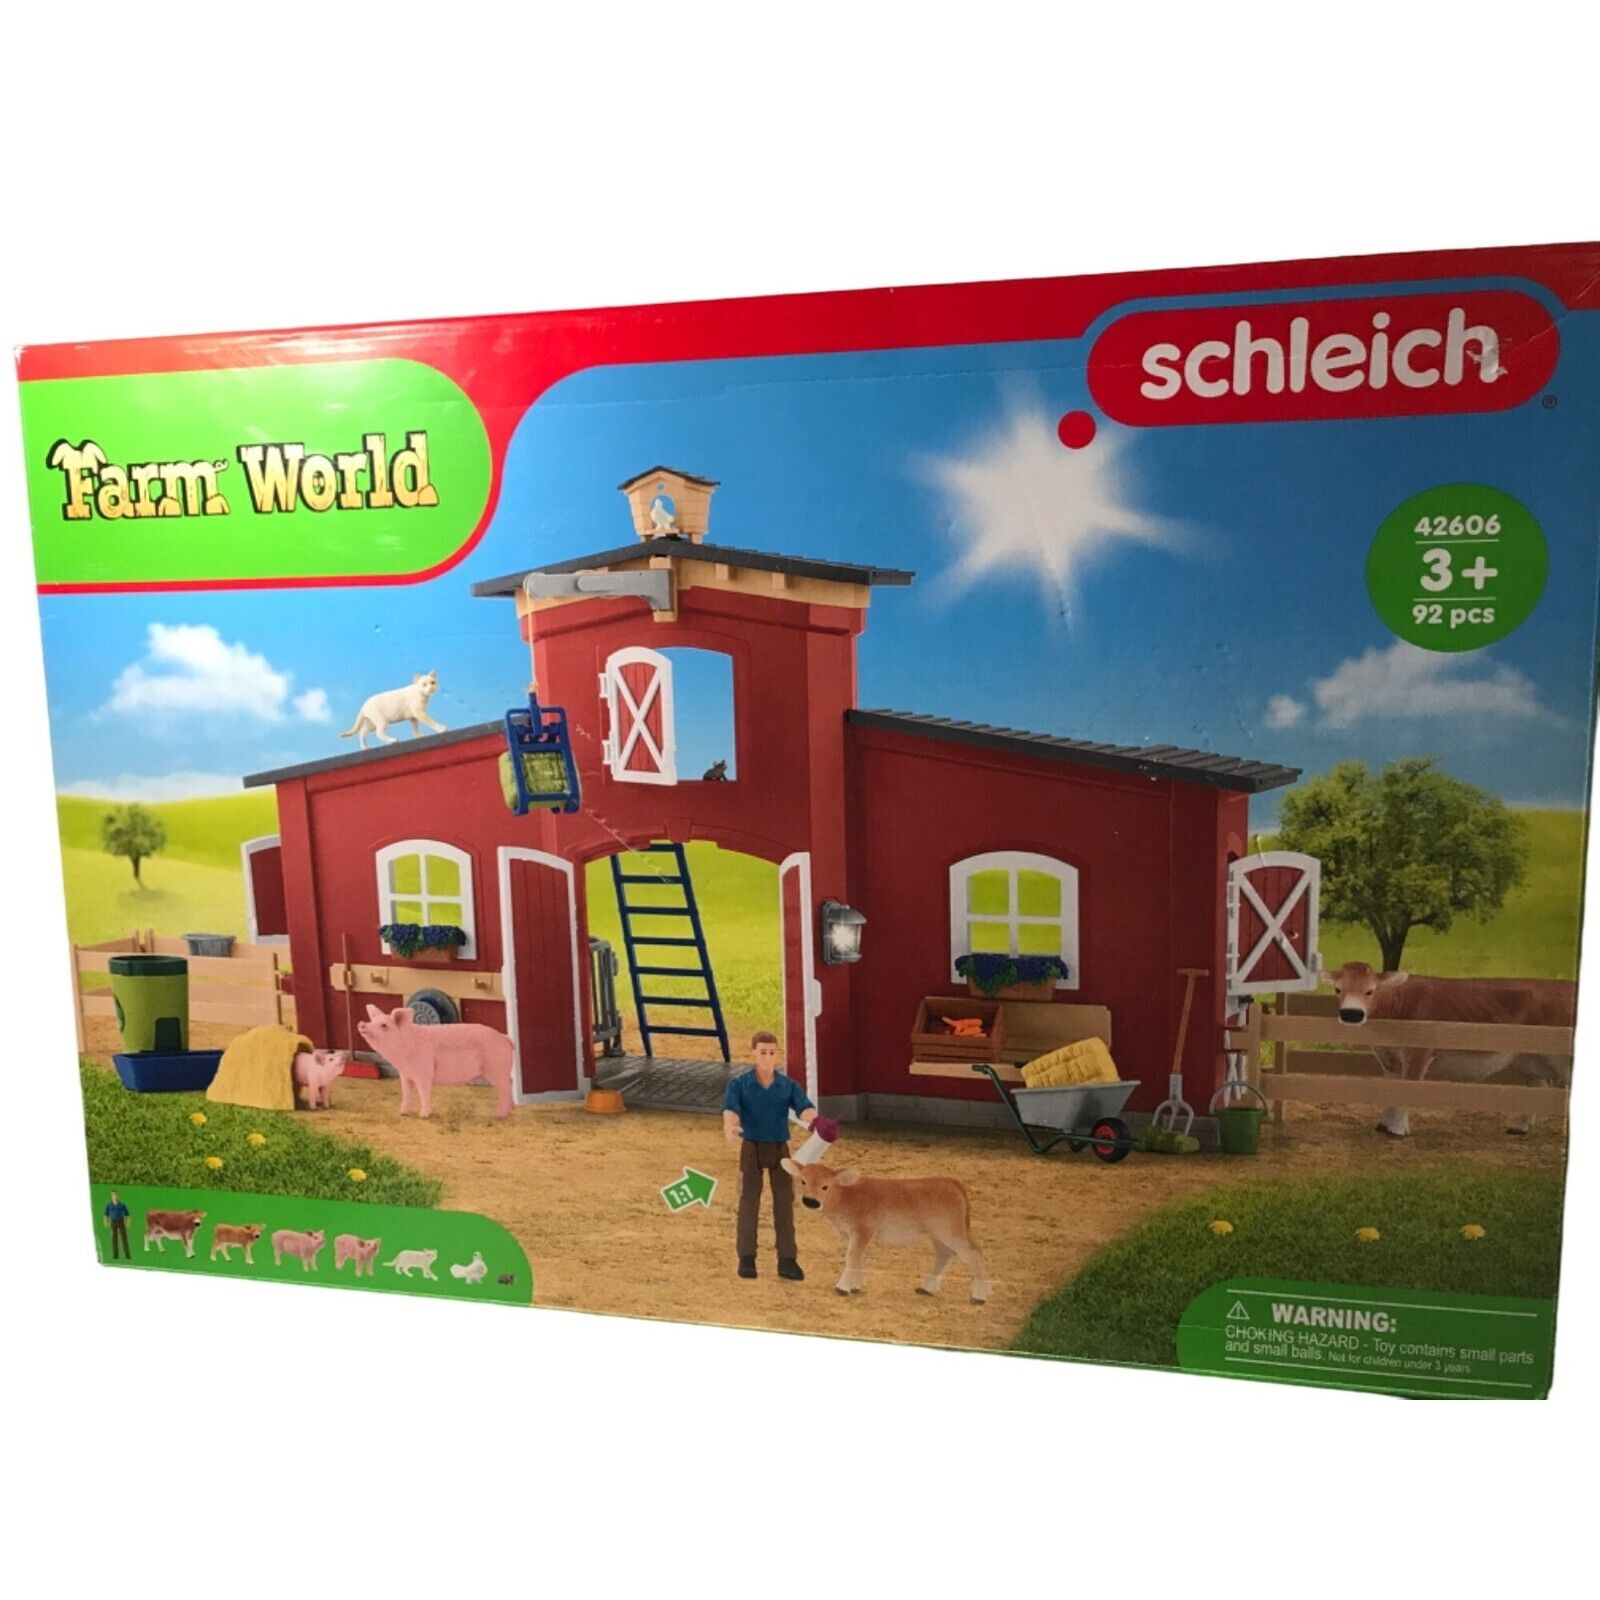 SCHLEICH Farm World Large Barn Animals Cow Pig Kitty Stall 42606 TOY Ages 5-12